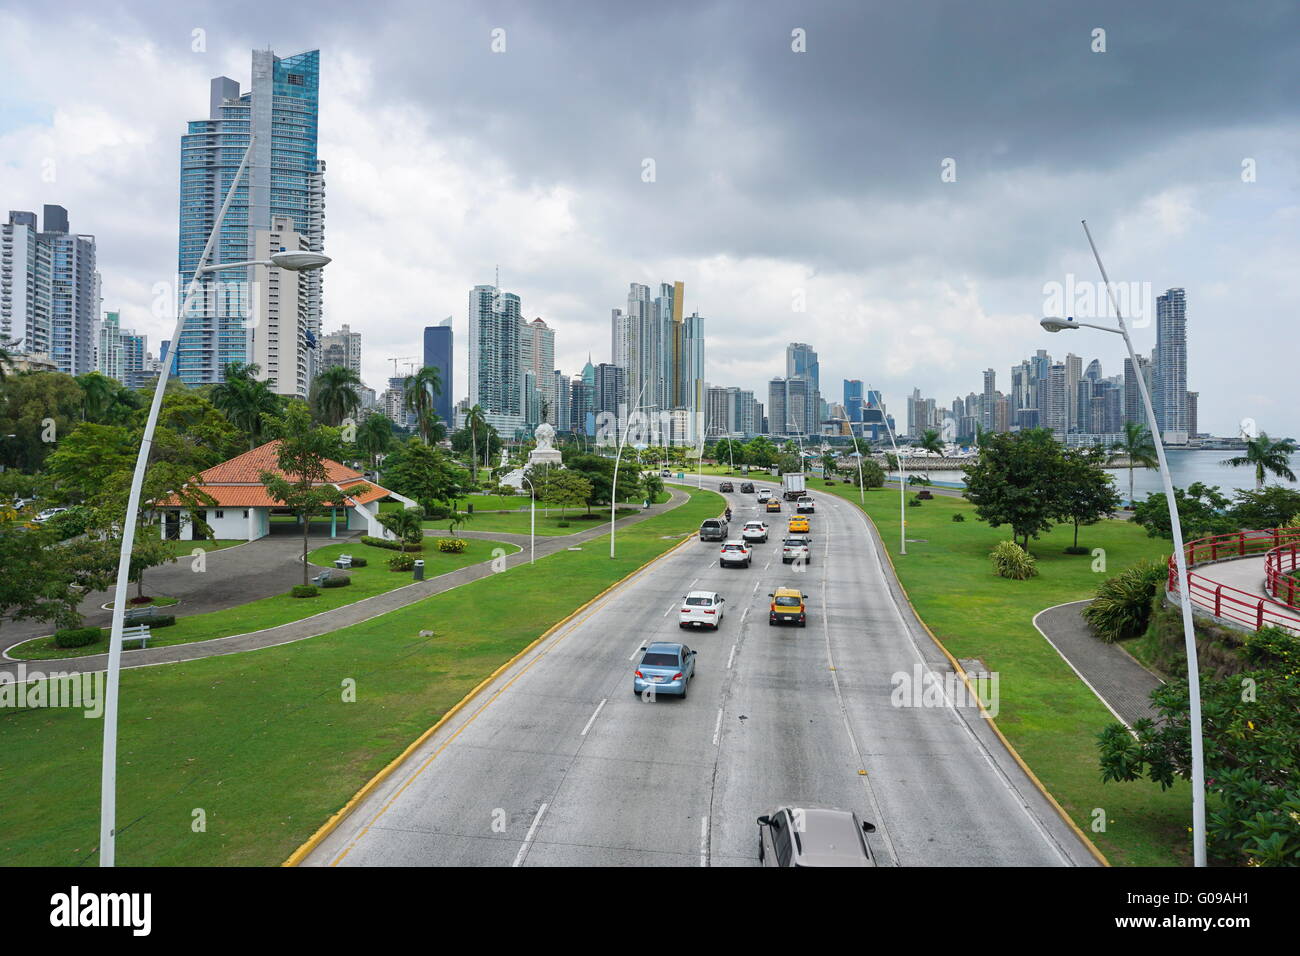 Highway in Panama City with skyscrapers and cloudy sky, Panama, Central America Stock Photo